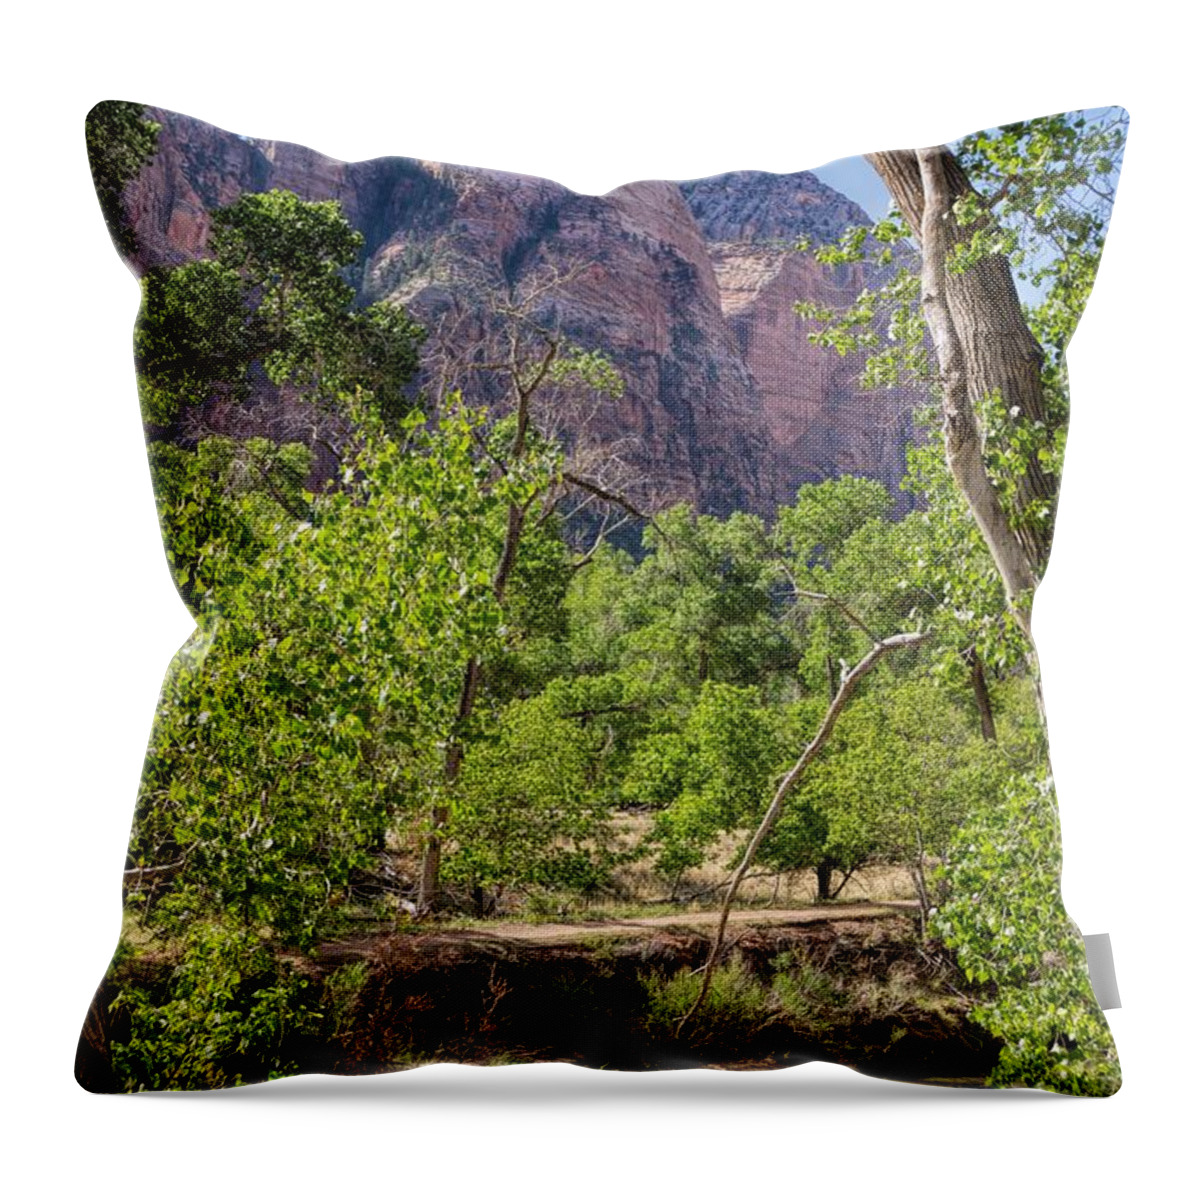 Utah Throw Pillow featuring the photograph Virgin River at Zion #1 by Peggy Hughes